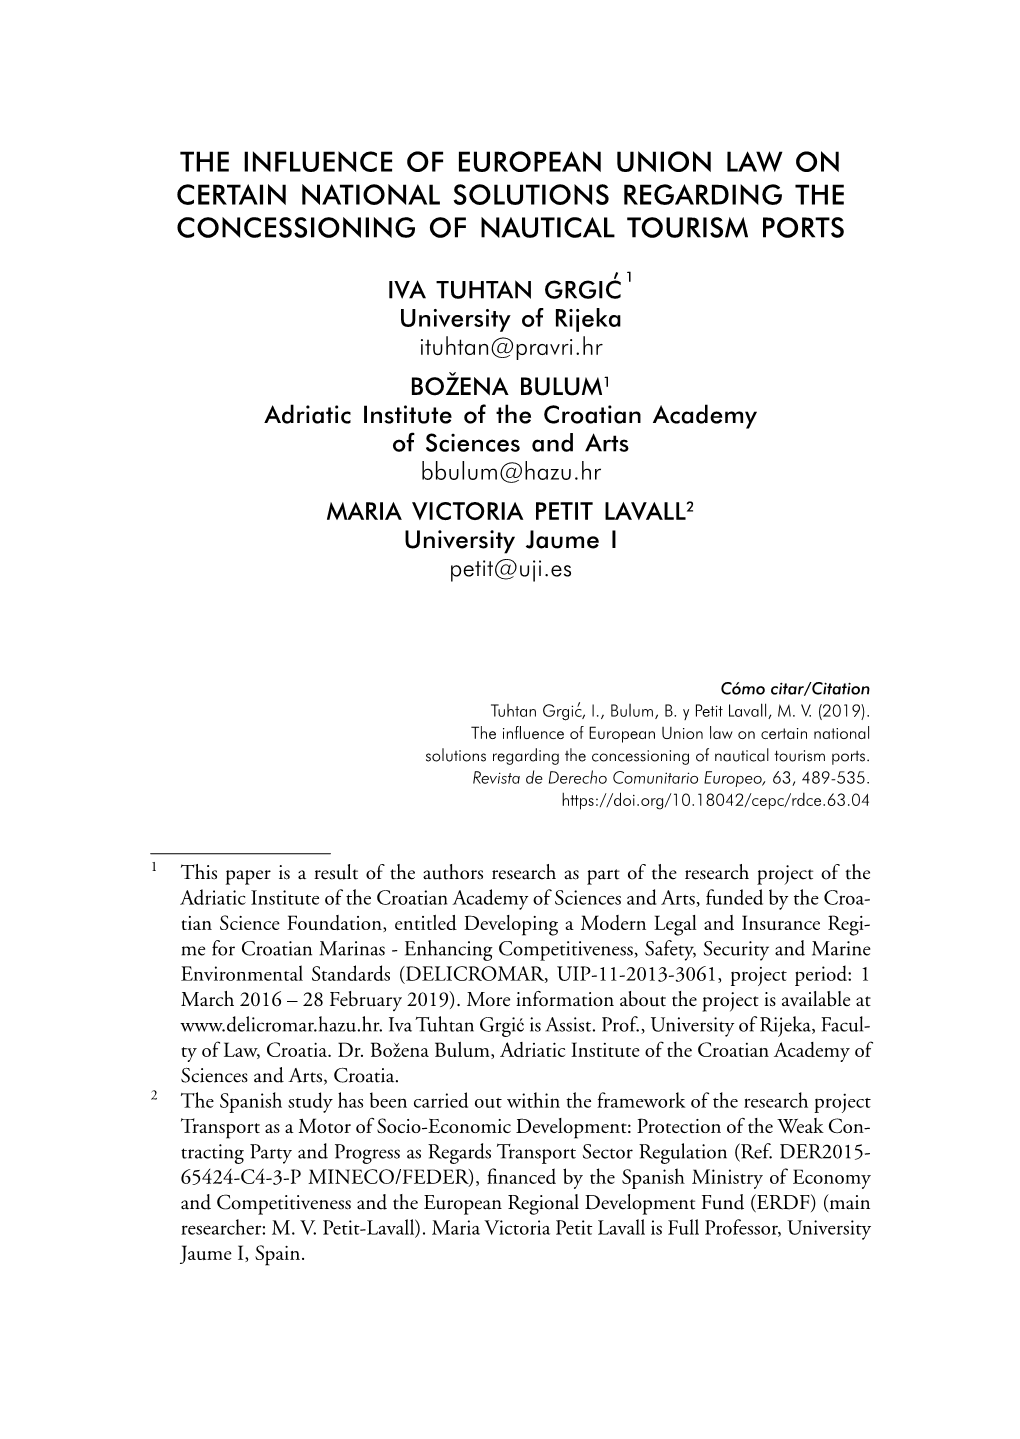 The Influence of European Union Law on Certain National Solutions Regarding the Concessioning of Nautical Tourism Ports